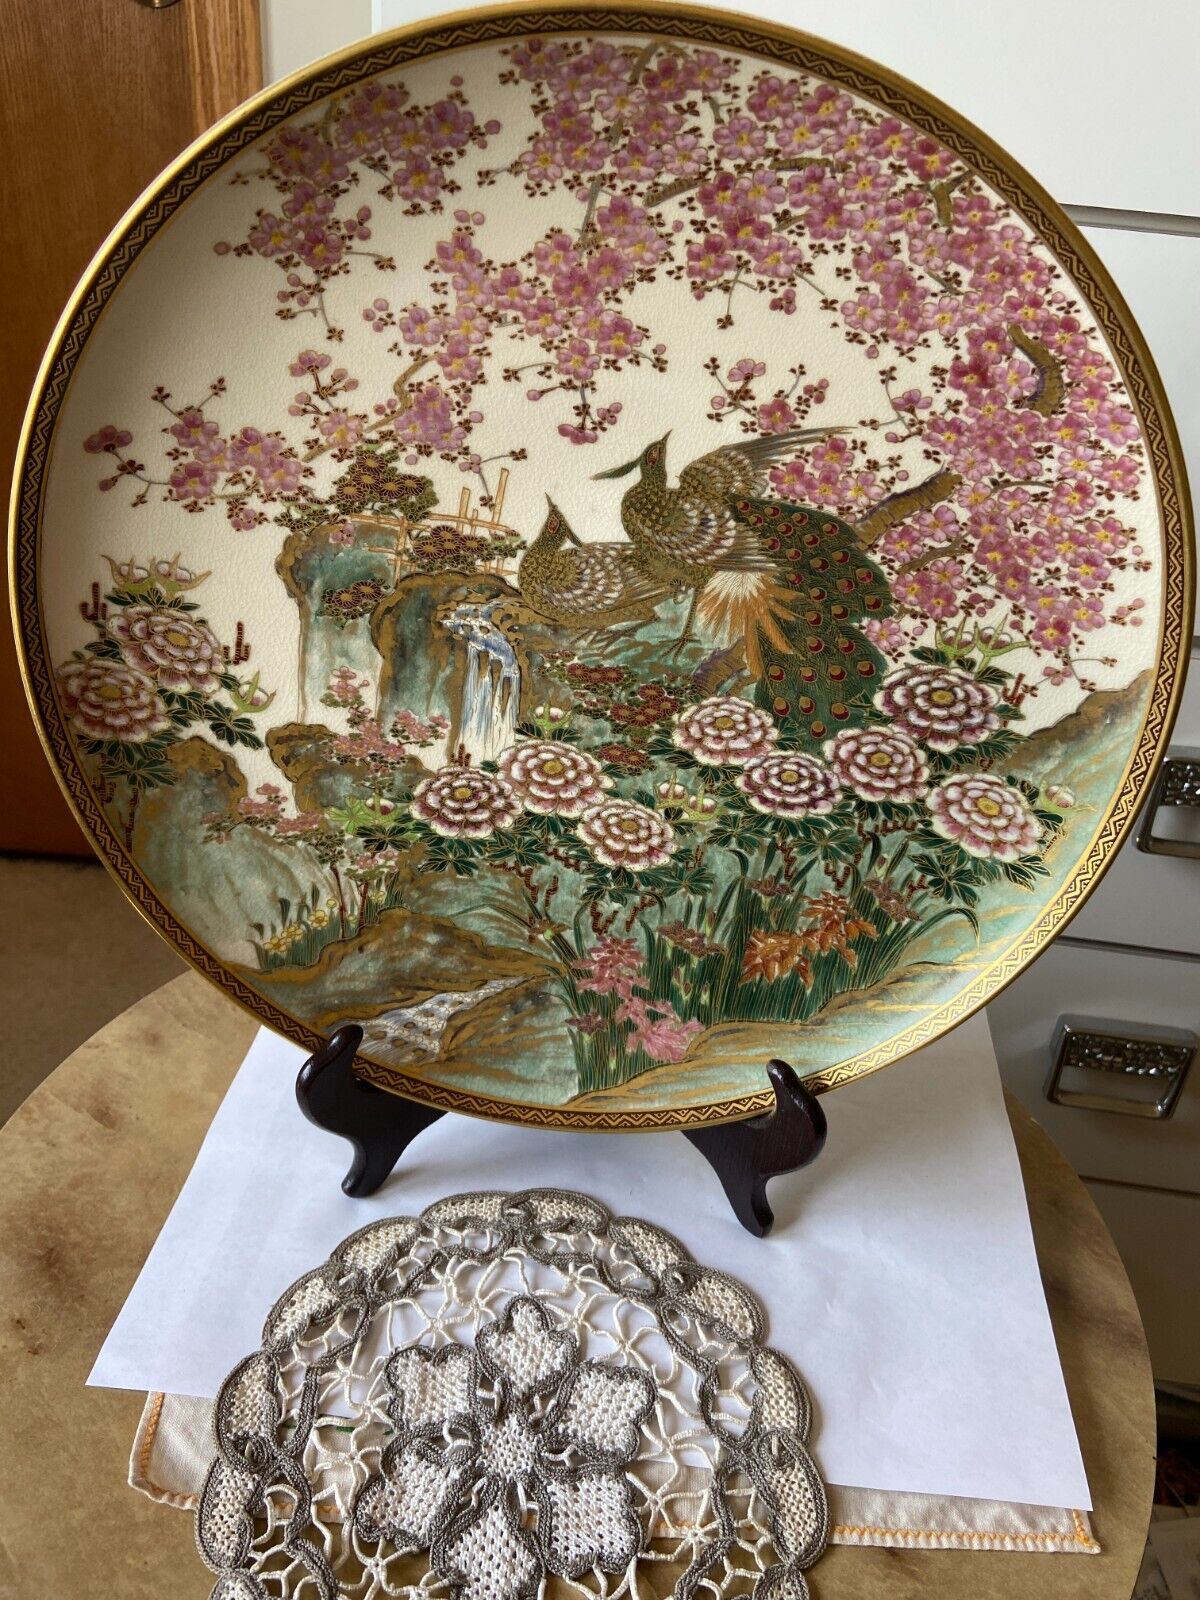 JAPANESE  SATSUMA  12 INCHES CHARGER WITH PAIR OF PEACOCKS AND FLOWERING BUSHES